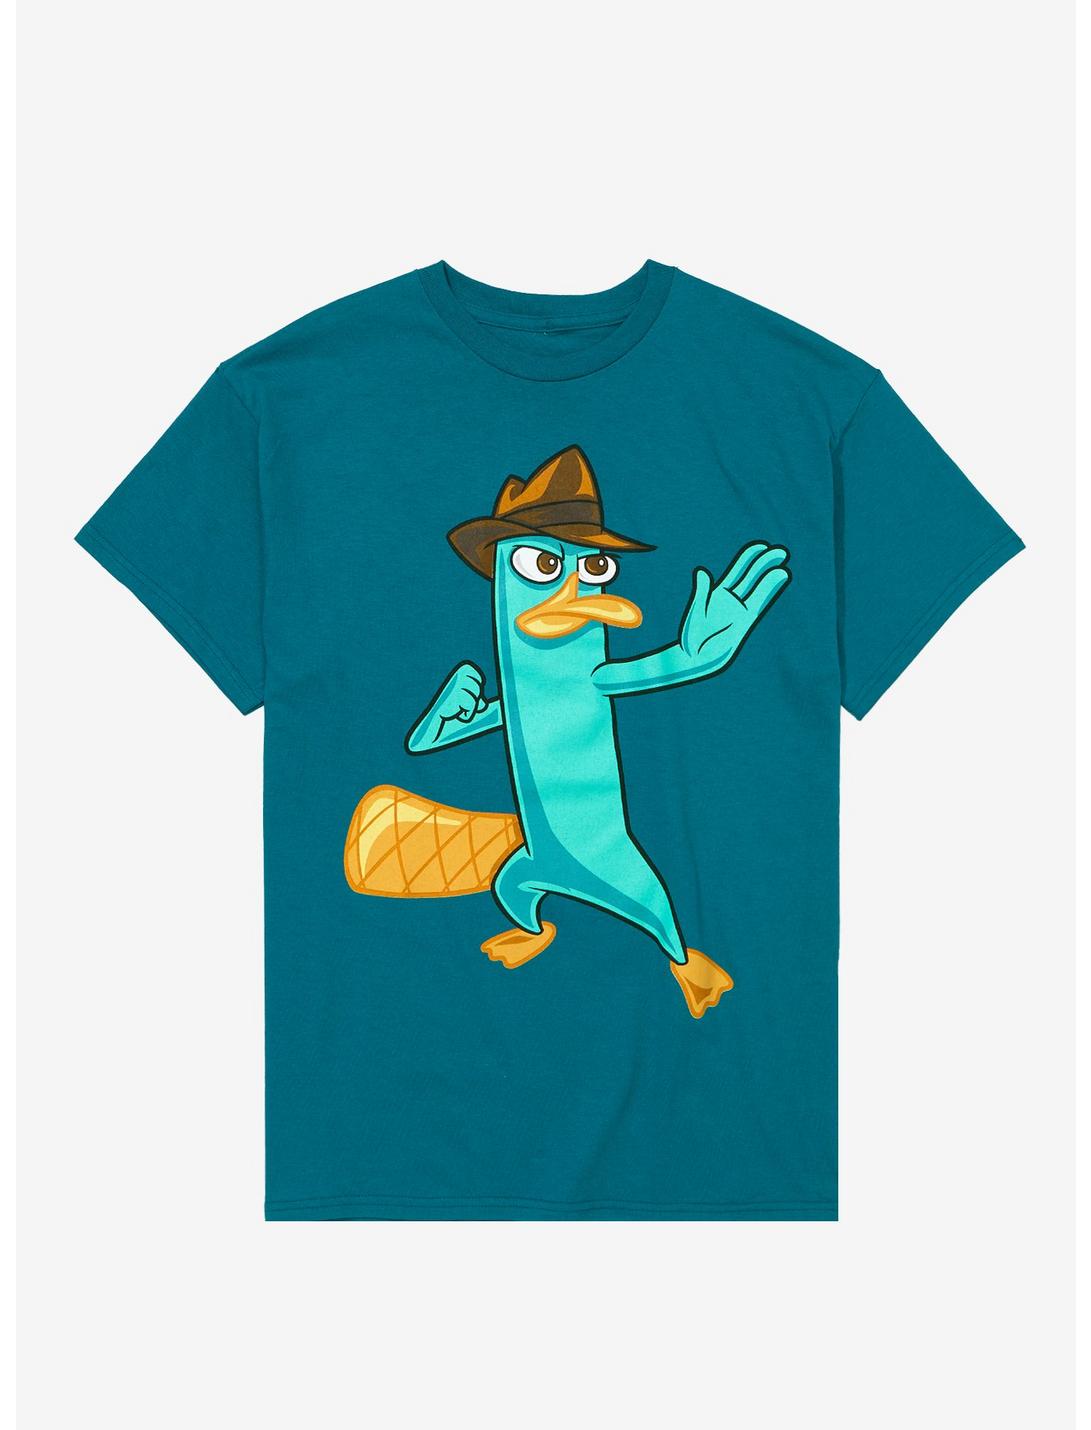 Phineas And Ferb Perry The Platypus Boyfriend Fit Girls T-Shirt, MULTI, hi-res